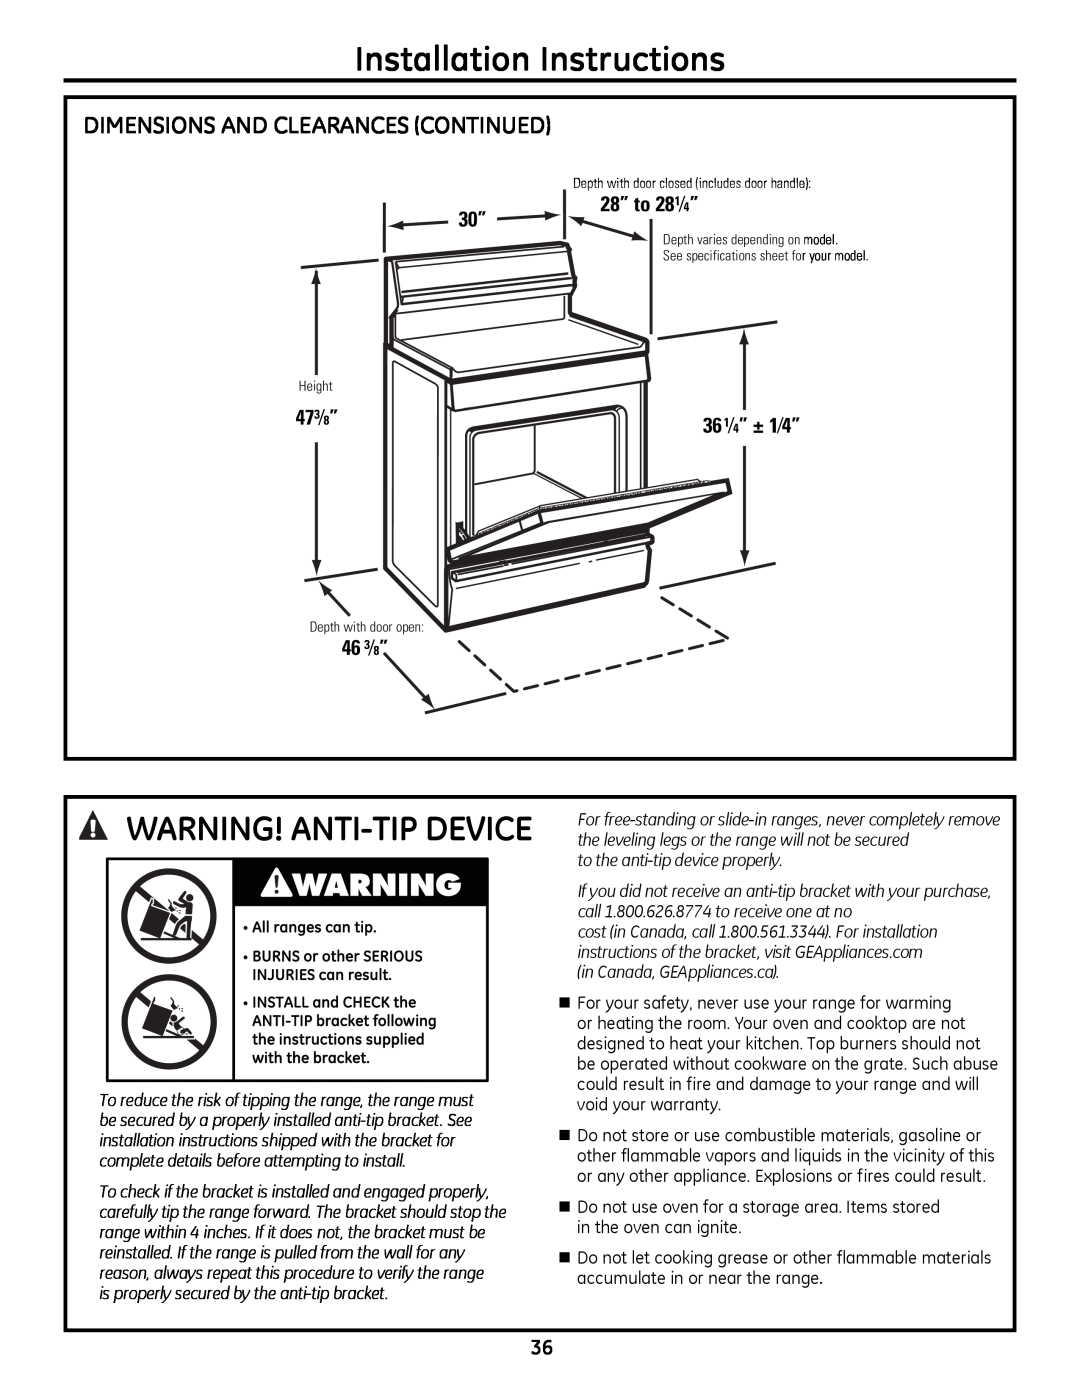 GE JGB3000, JGB3001, JGB281 Installation Instructions, wARNING! ANTI-TIP DEVICE, DIMENSIoNS AND CLEARANCES CoNTINUED 